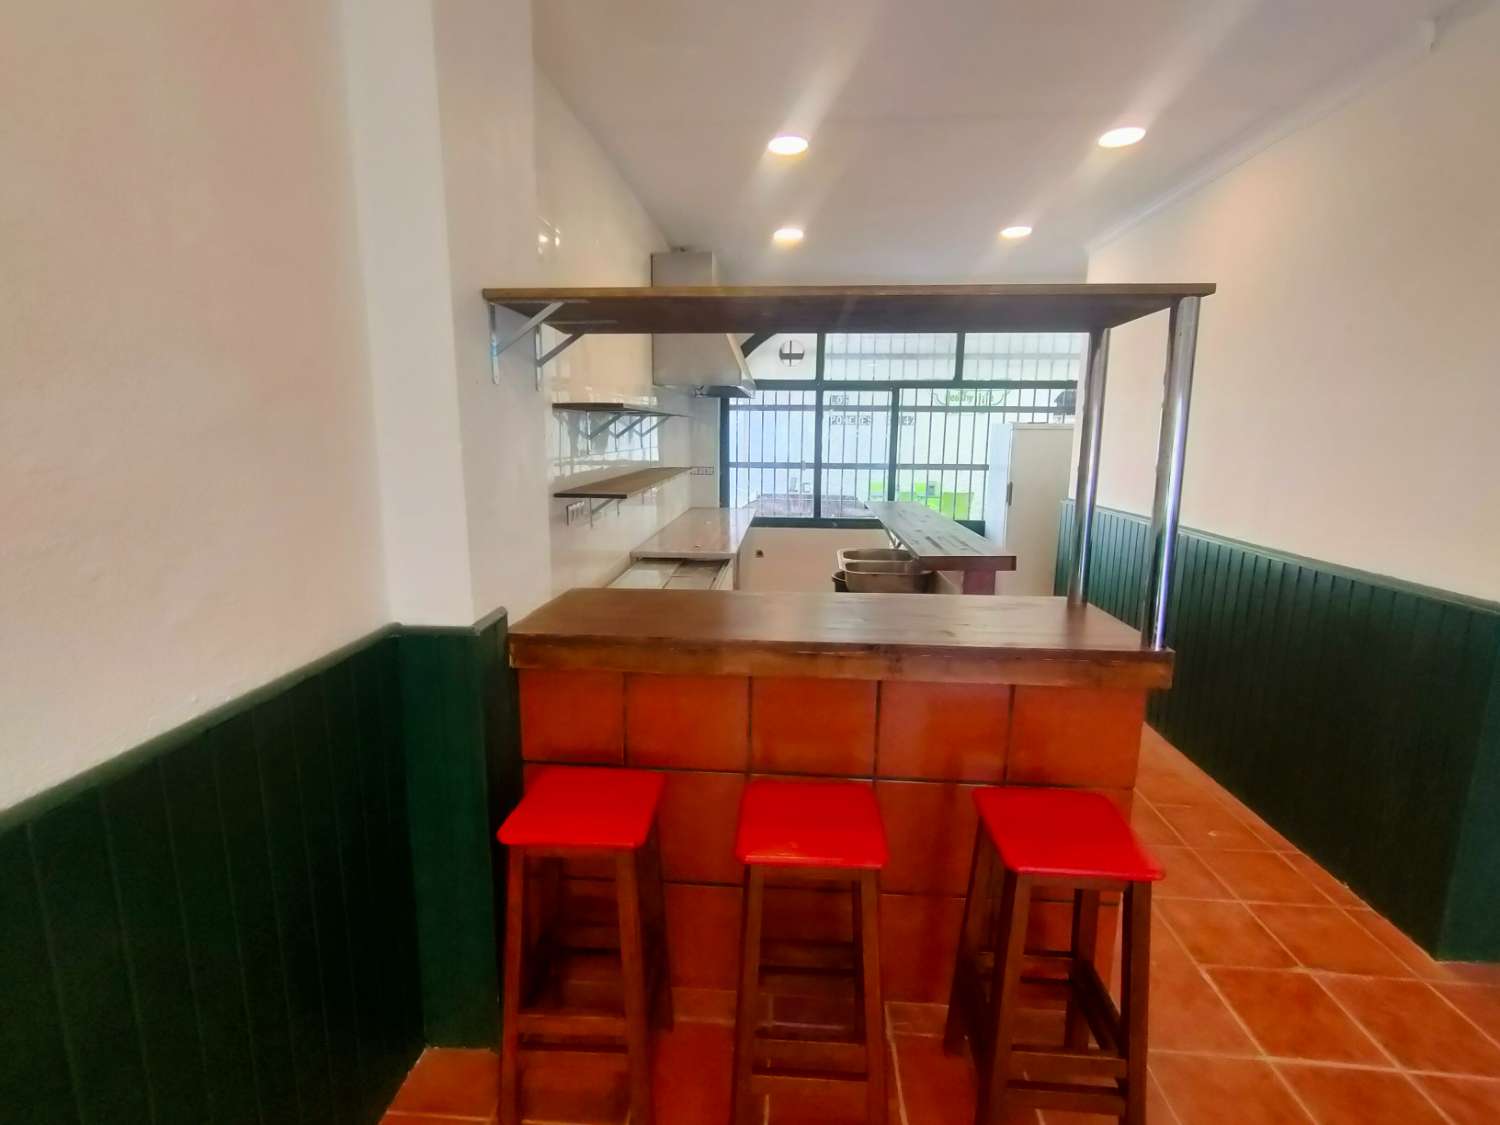 Bar for sale Benalmadena Costa del Sol - KITCHEN & TERRACE 15 TABLES - 300 m away from PUERTO MARINA